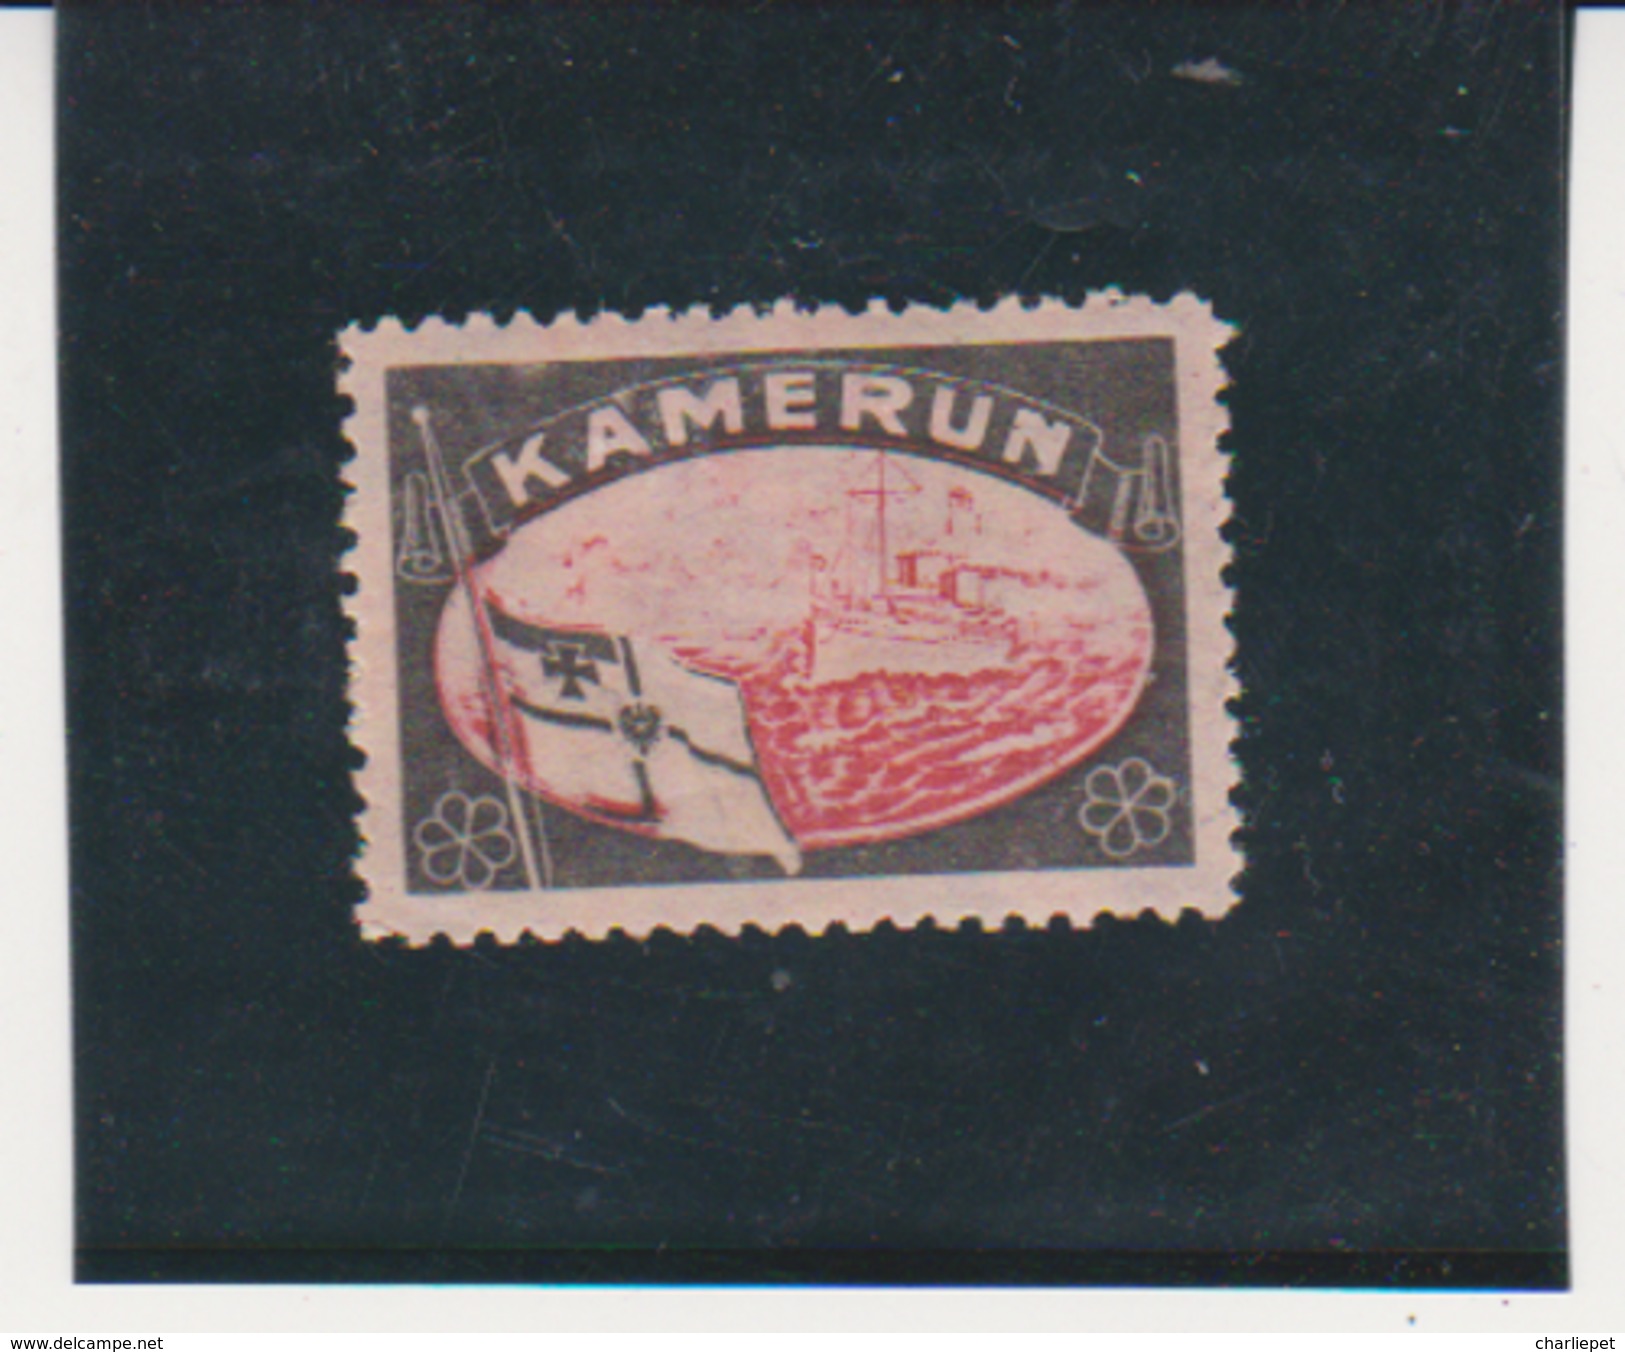 German Germany Mourning Labels Lost Colonies Cameroun Kamerun Cinderella Issued In 1920 By Sigmund Hartig MH - Cameroun